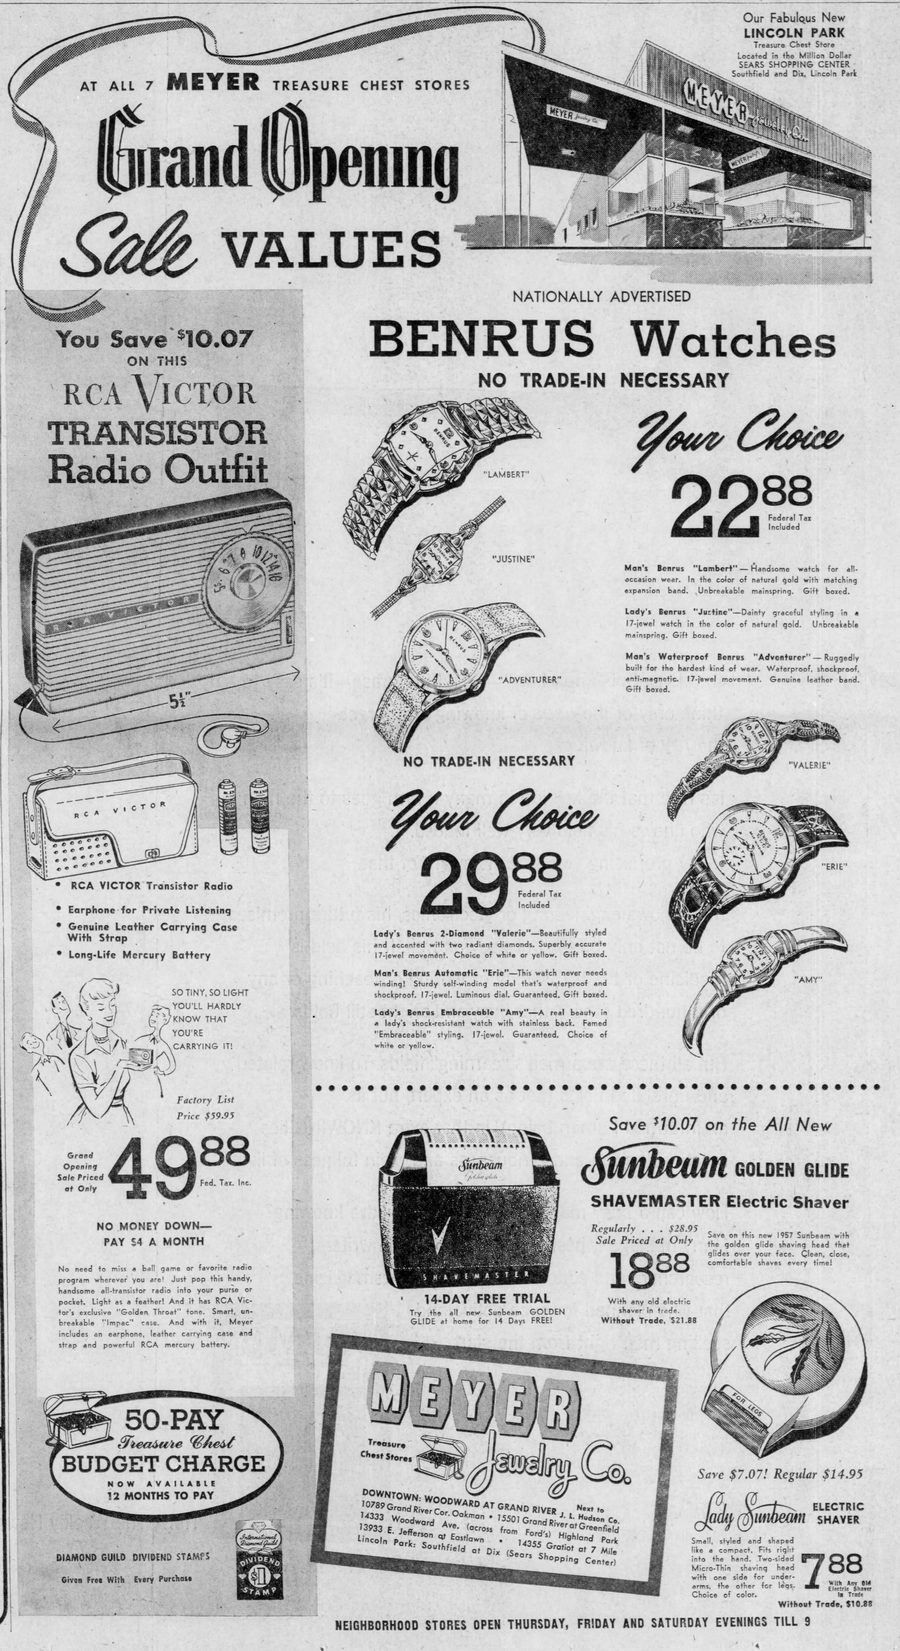 Sears Shopping Center (Lincoln Park Shopping Center) - May 23 1957 Ad